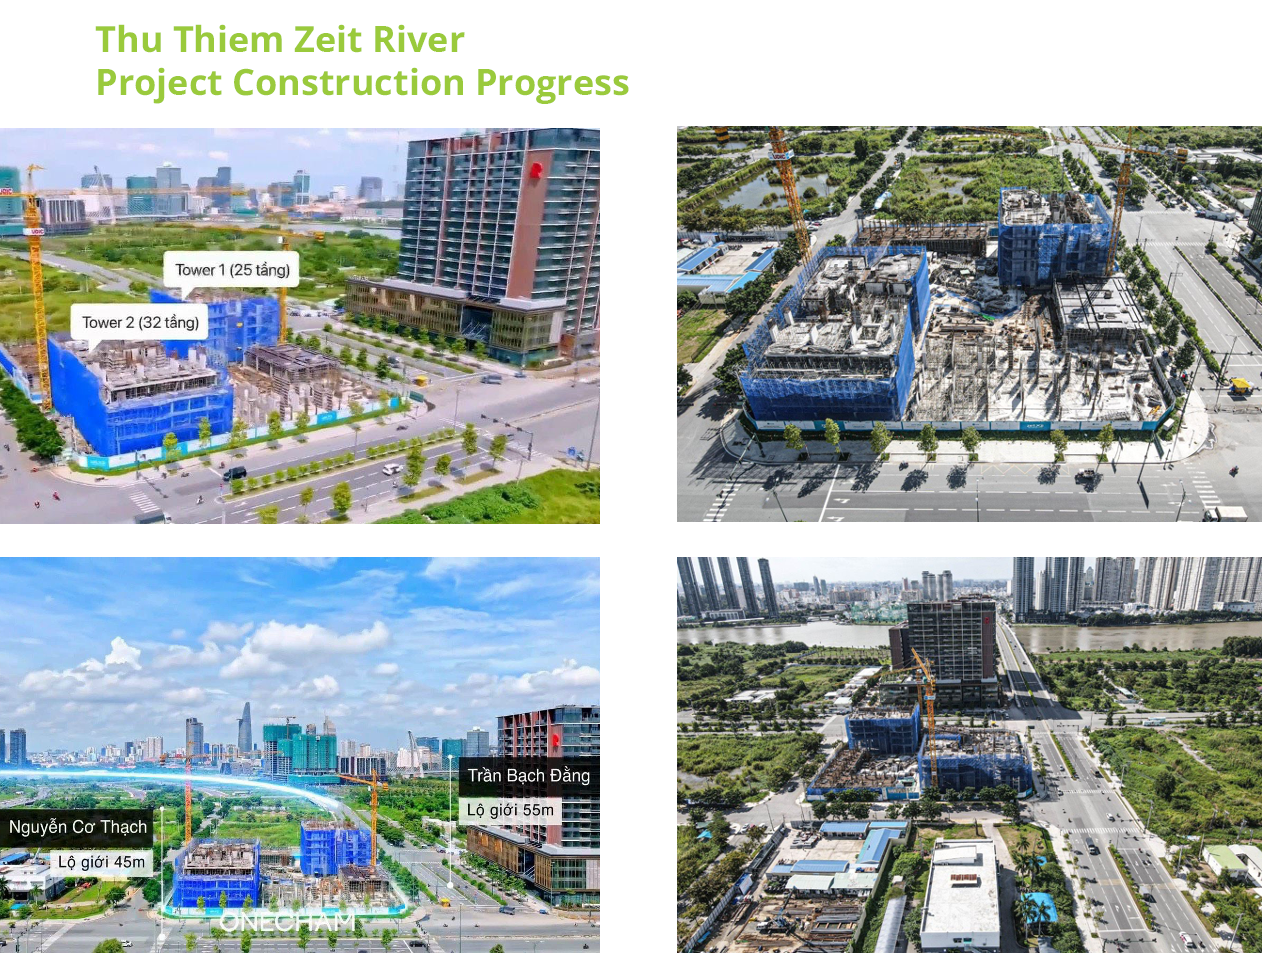 Thu Thiem Zeit River has completed the foundation